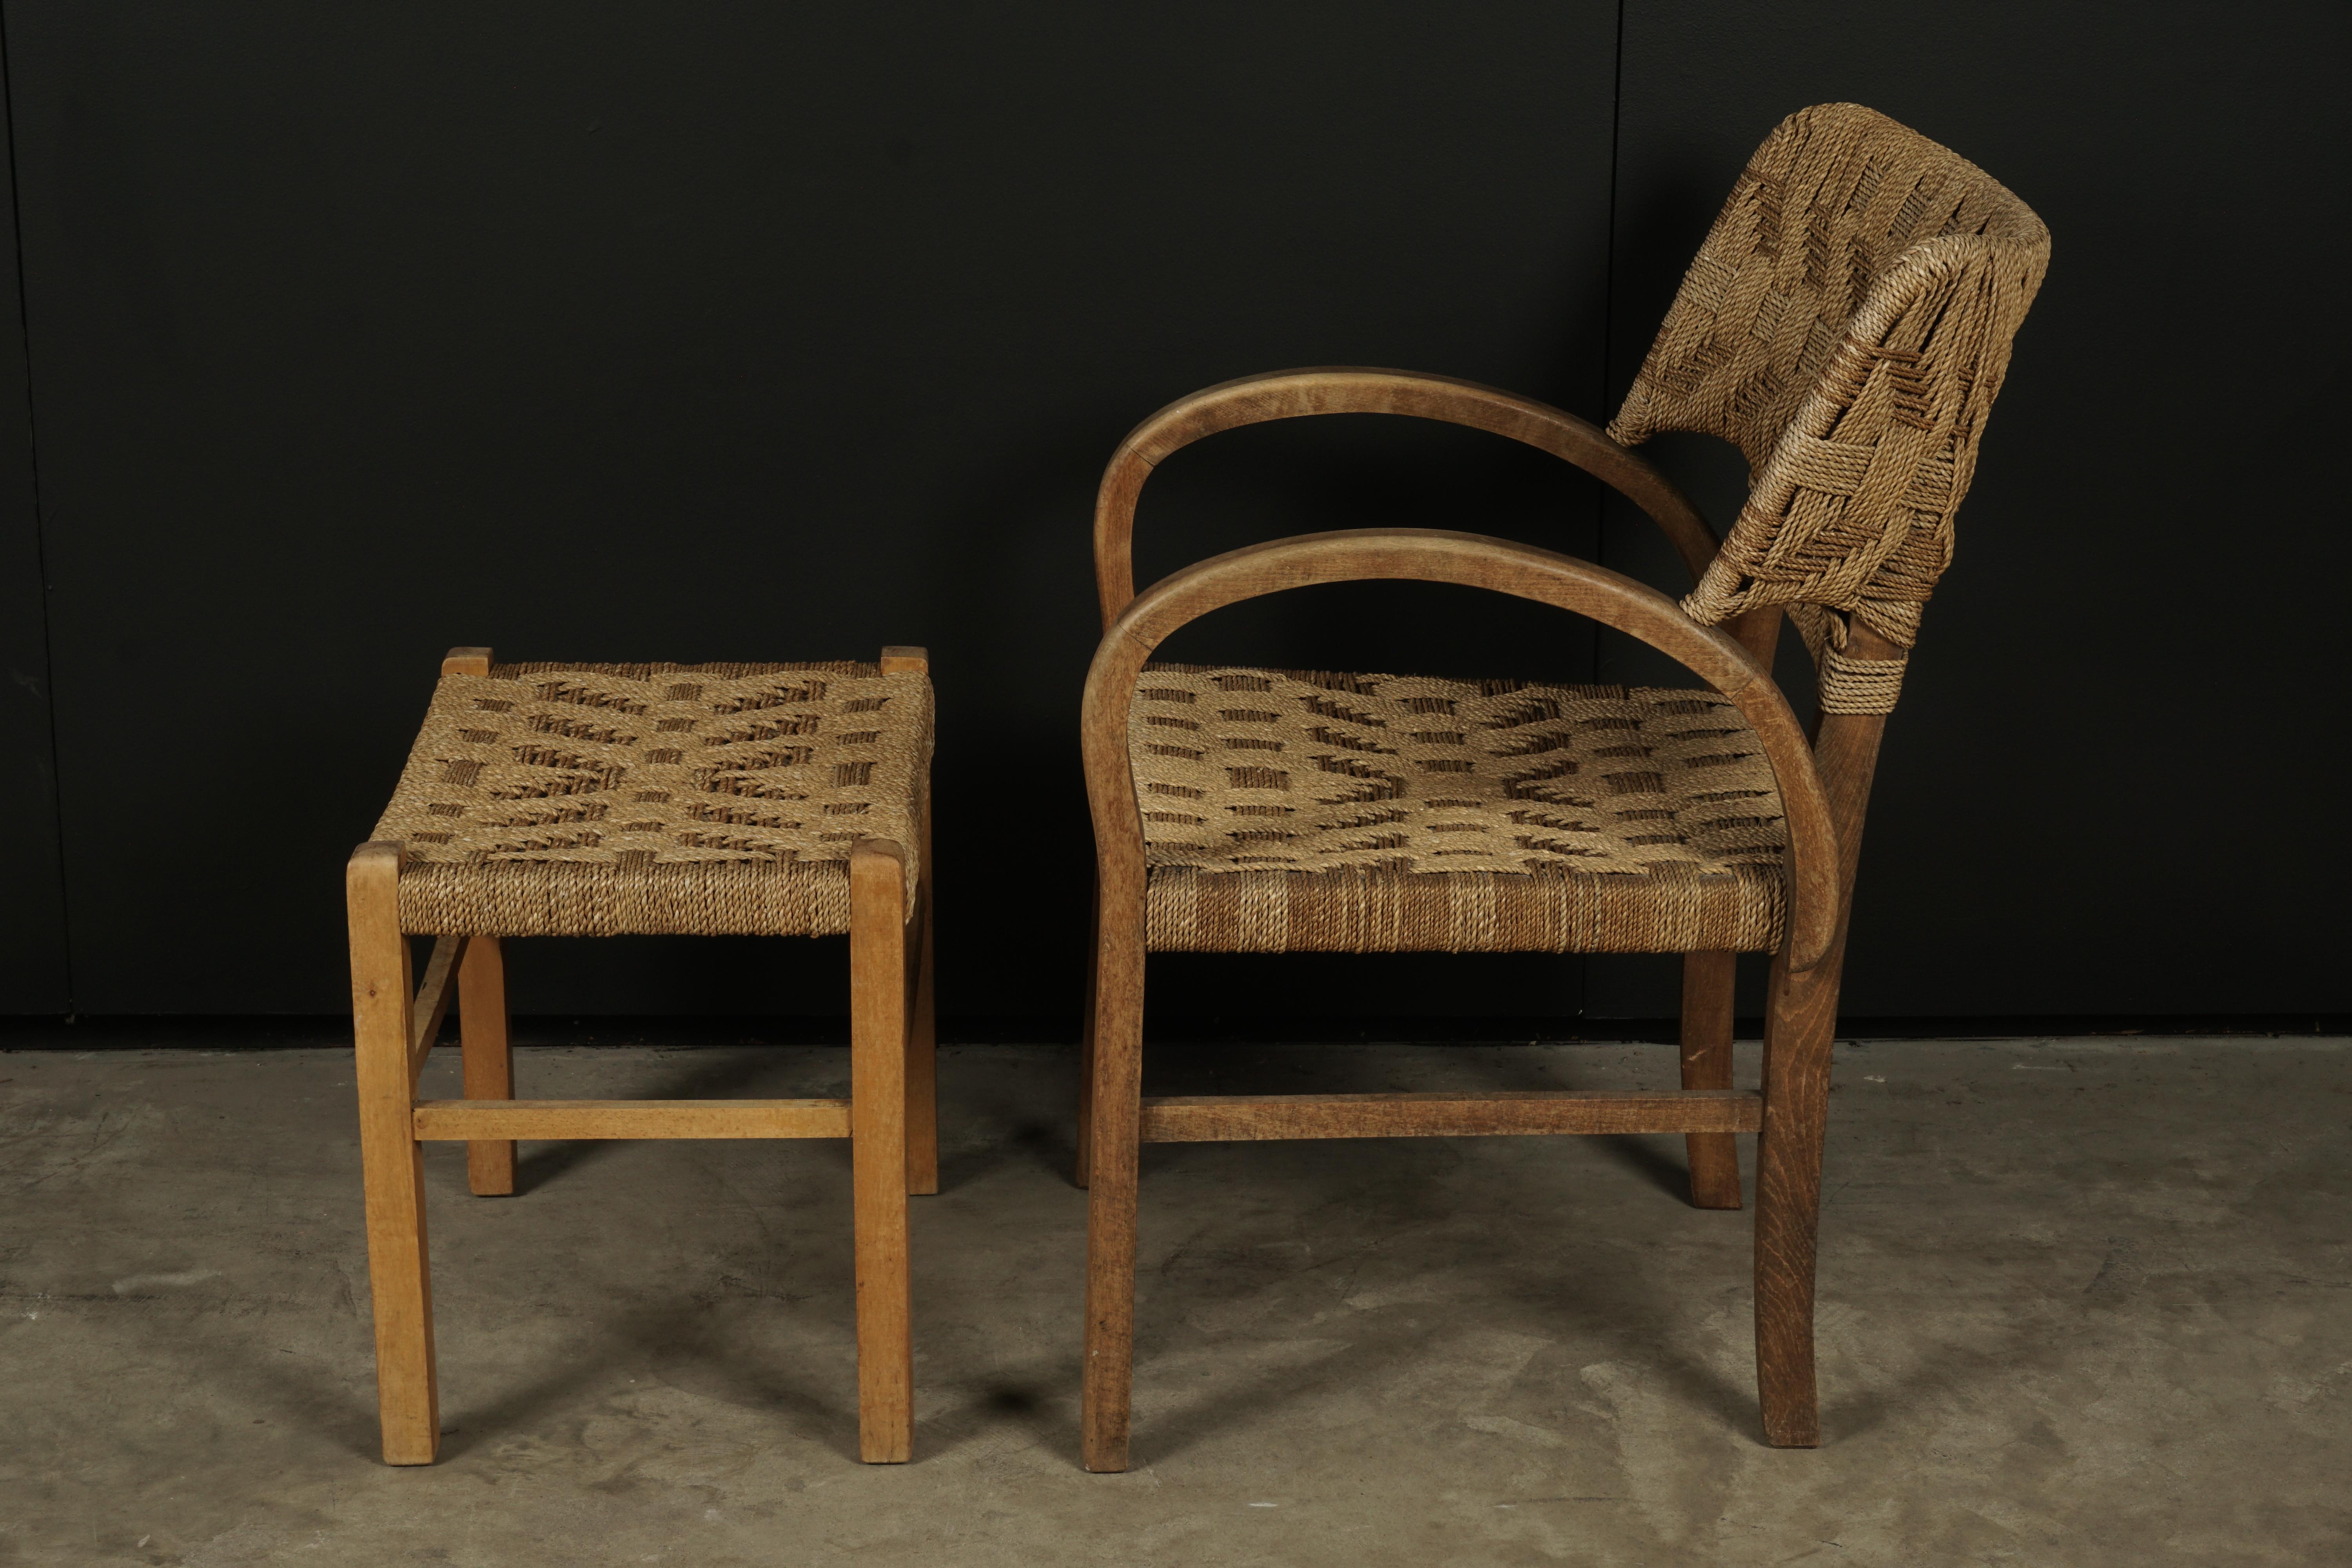 Midcentury chair with ottoman from Holland, circa 1960. Bentwood birch frame with woven paper cord seat and back. Nice wear and patina. Ottoman: H-16.5 / W - 19.5 / D - 14.